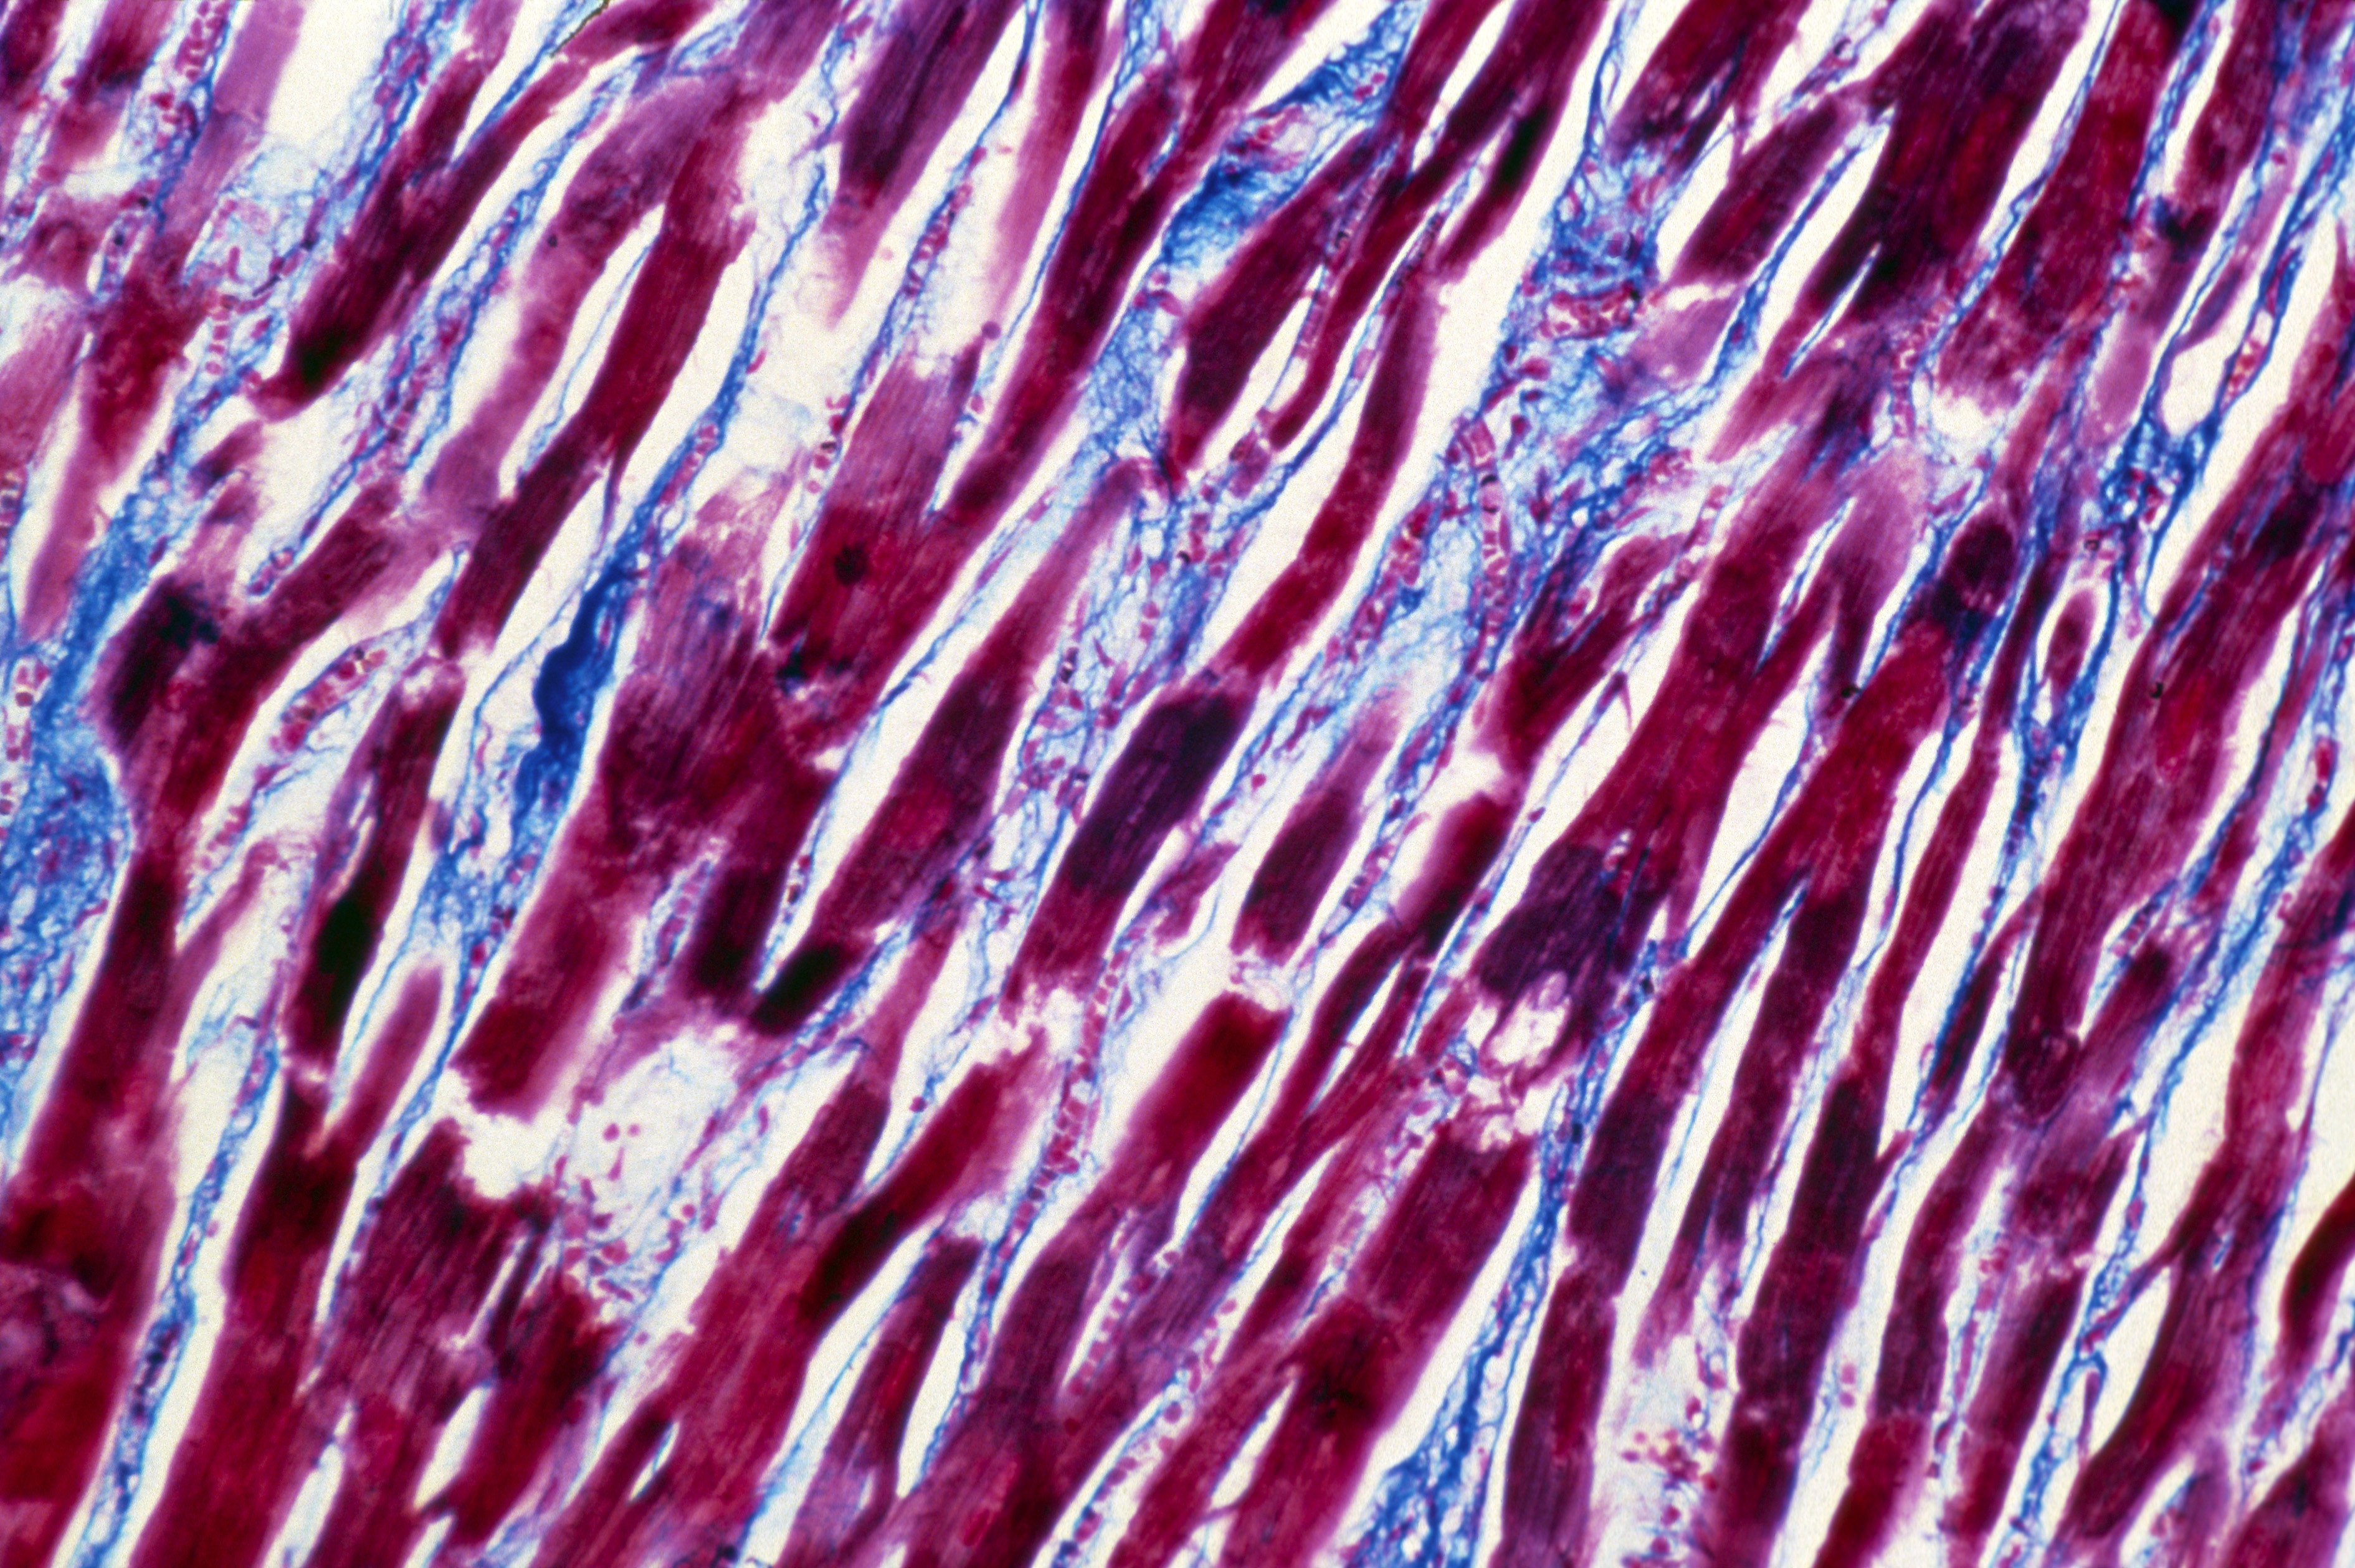 Light micrograph of human cardiac muscle with chronic myocarditis (inflammation). (Hanns-Frieder Michler—Science Photo Library/Getty Images)